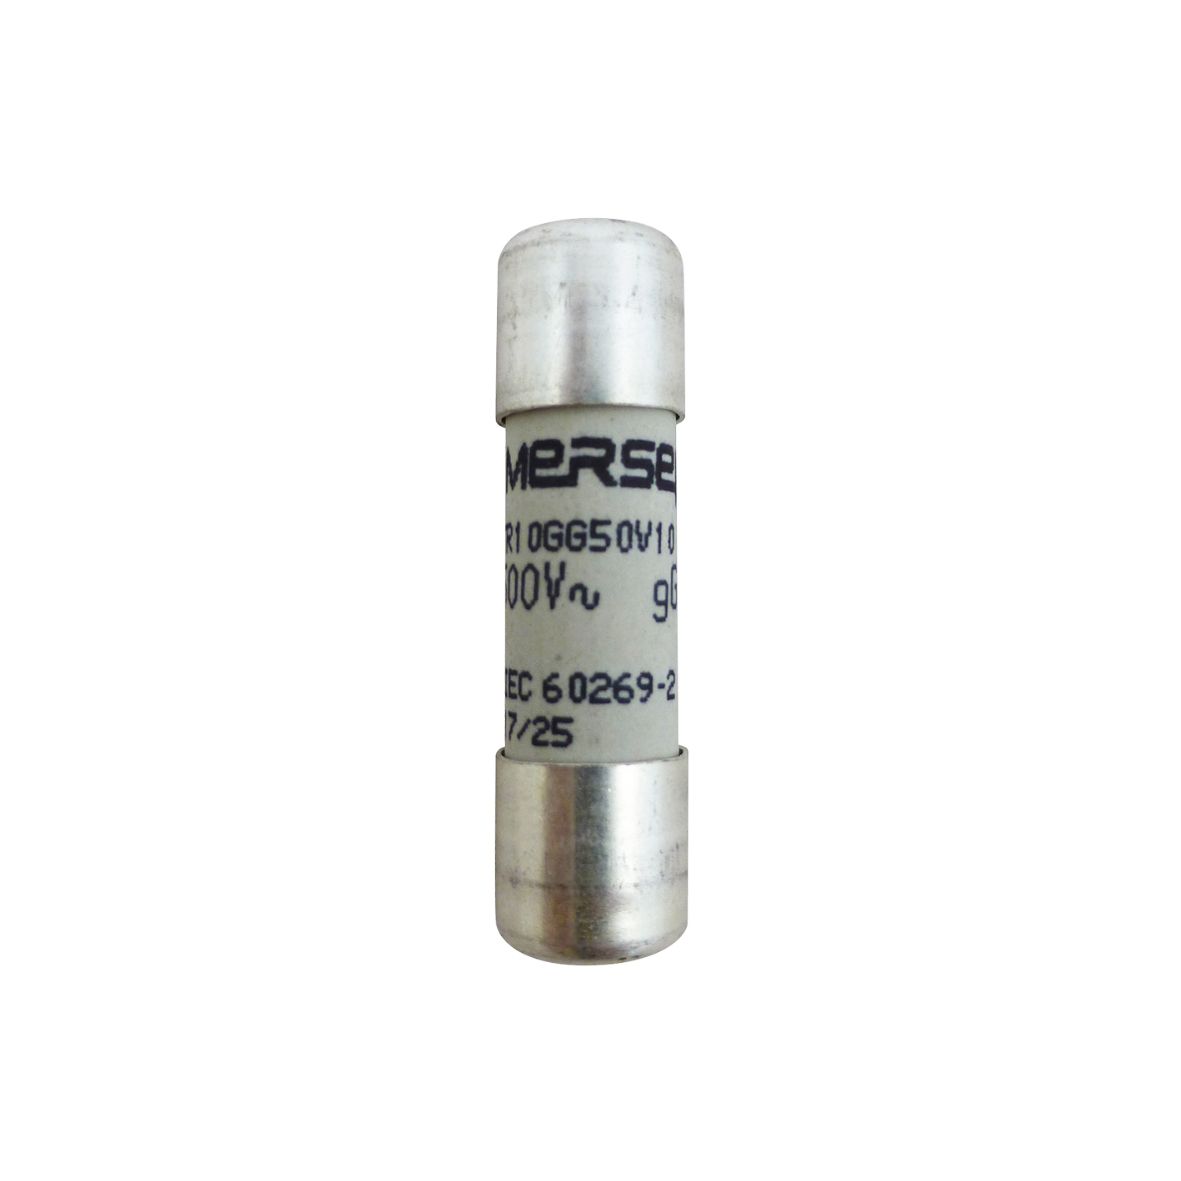 S218194 - Cylindrical fuse-link gG 500VAC 10.3x38, 10A